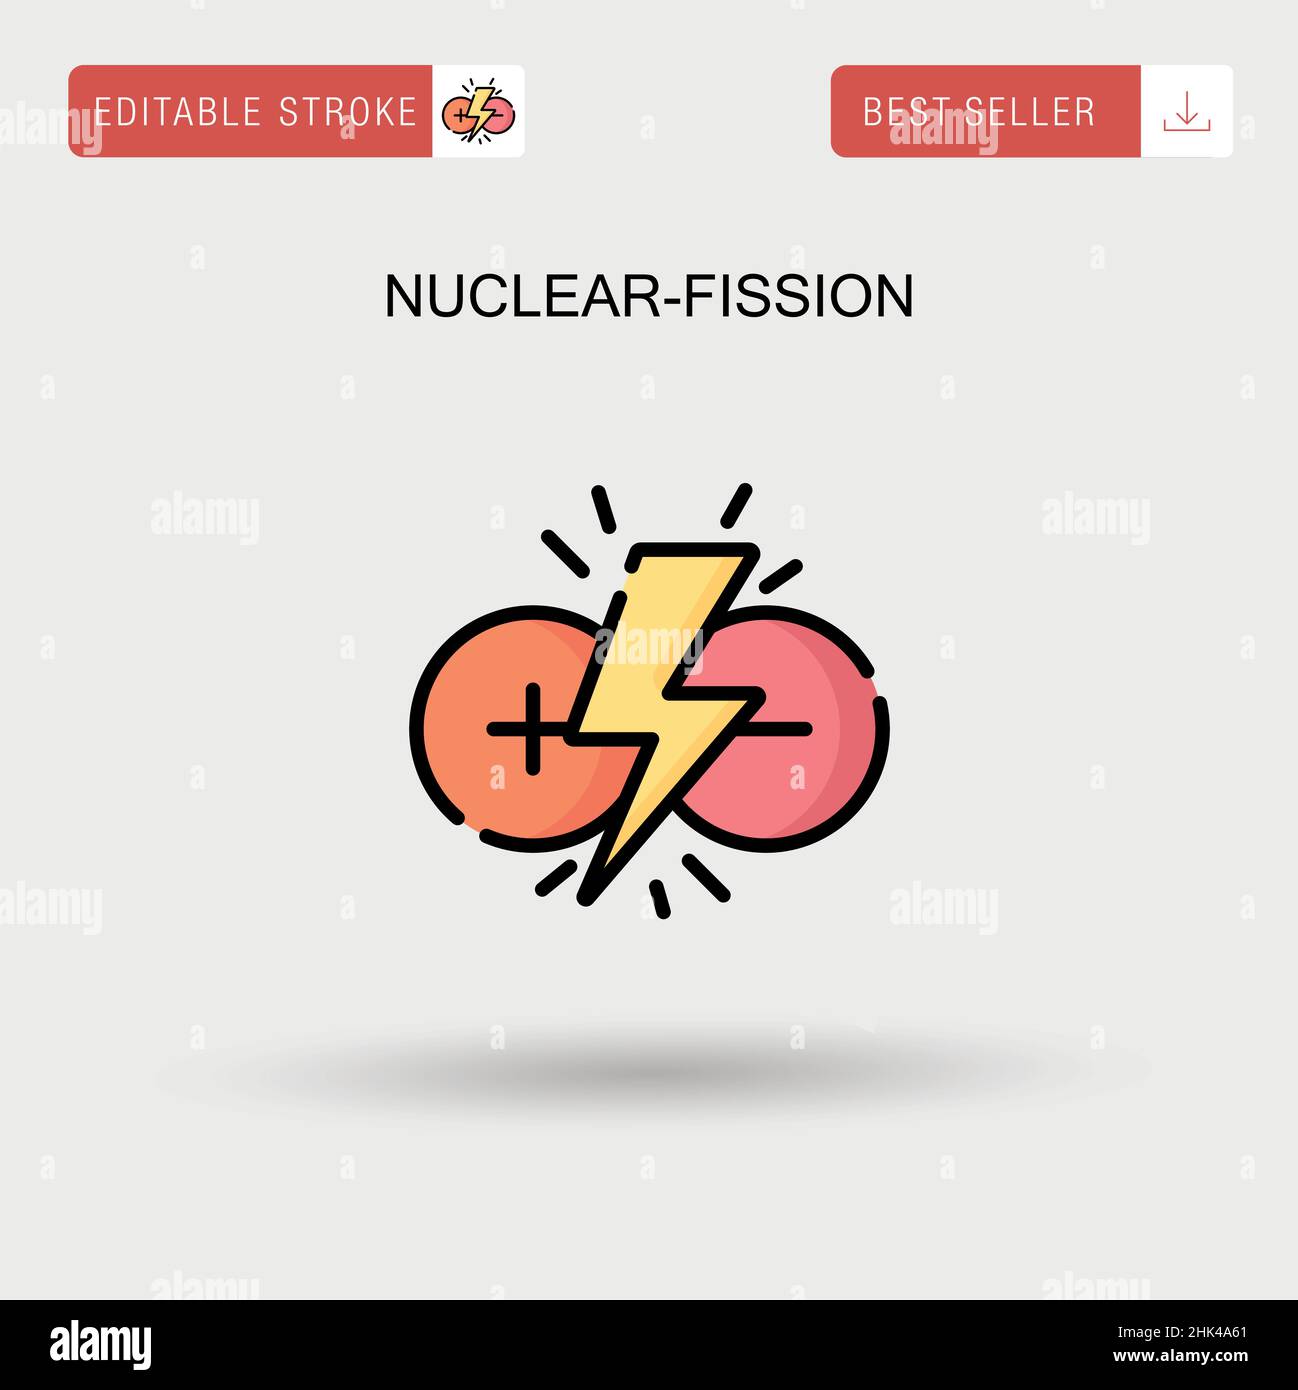 Nuclear-fission Simple vector icon. Stock Vector